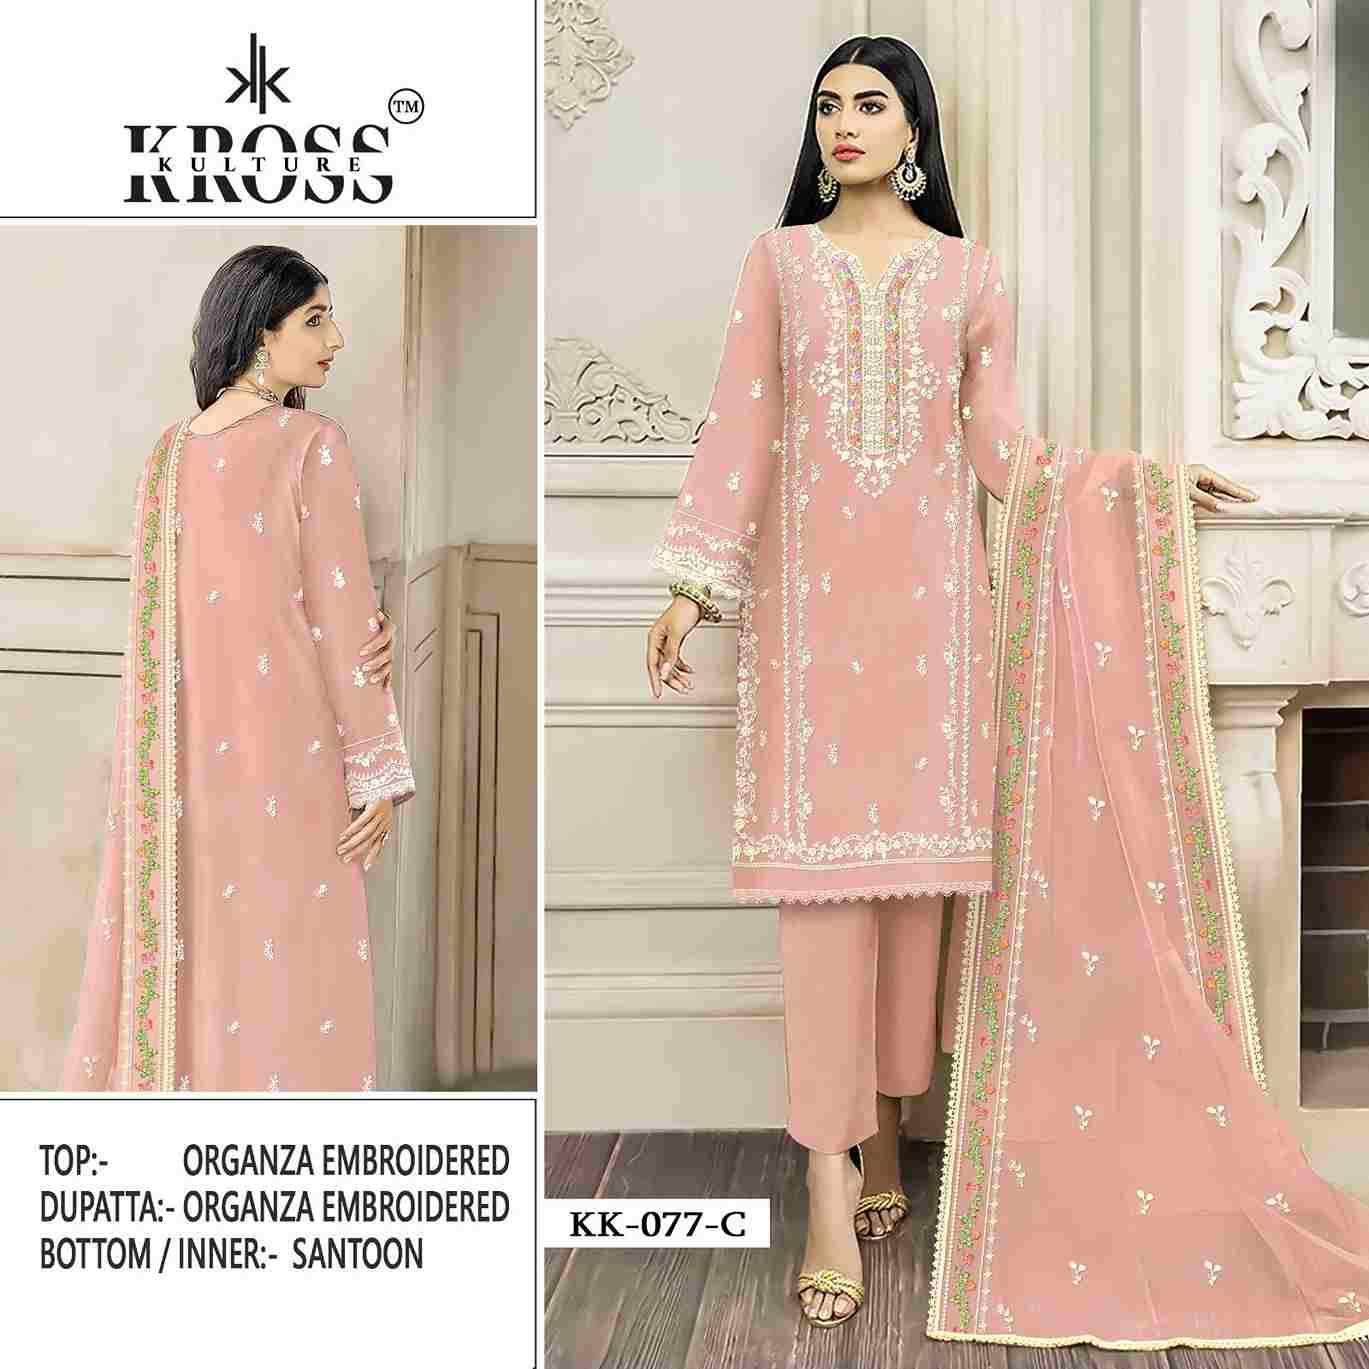 Kross Kulture Hit Design 077 Colours By Kross Kulture 077-A To 077-D Series Beautiful Stylish Pakistani Suits Fancy Colorful Casual Wear & Ethnic Wear & Ready To Wear Organza Embroidered Dresses At Wholesale Price